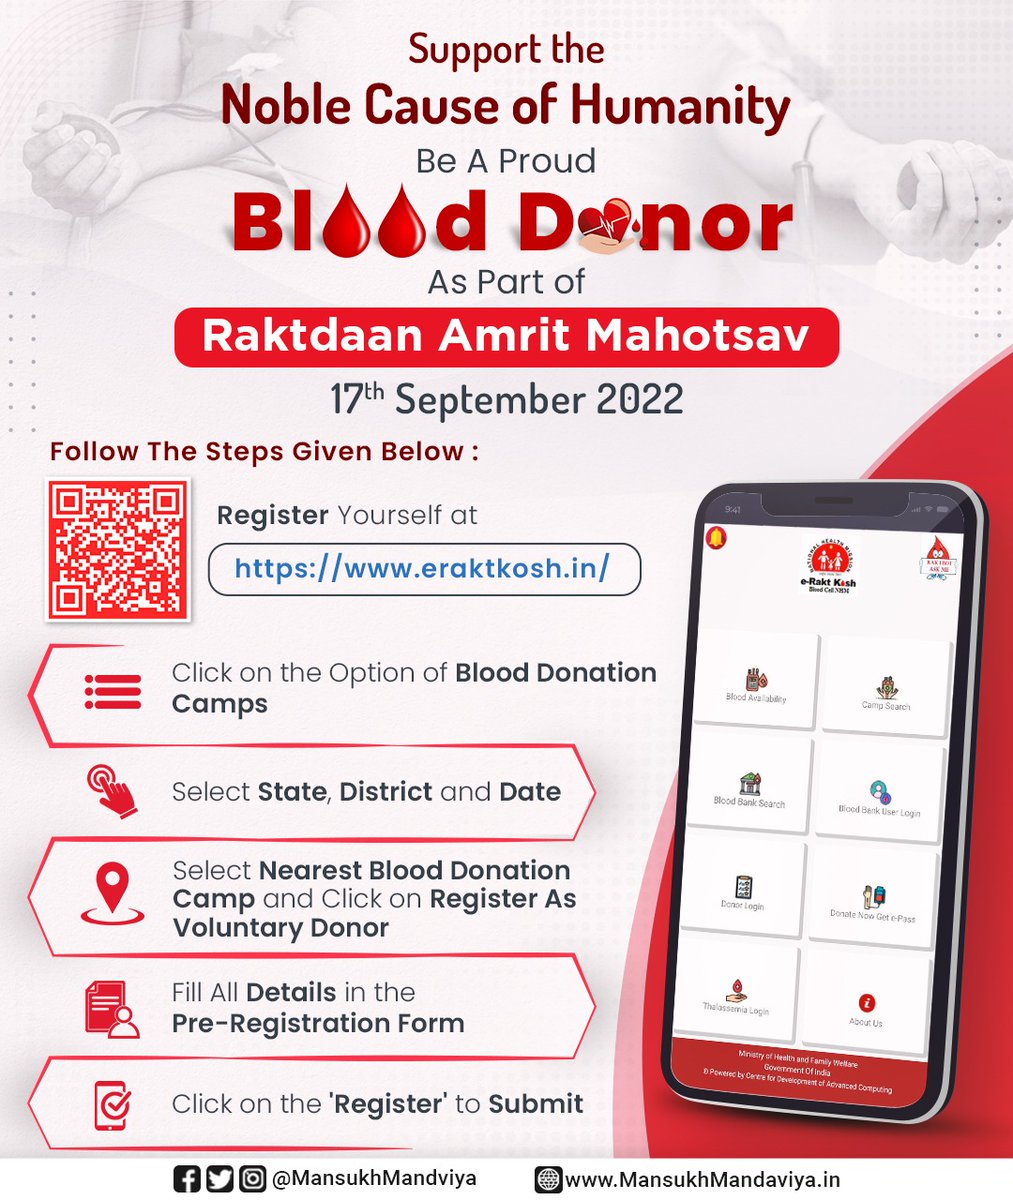 “The best way to find yourself is to lose yourself in the service of others.' - Mahatma Gandhi With this spirit join #RaktdaanAmritMahotsav beginning on 17th September. Every blood donor is a life saver. Visit eraktkosh.in & follow the steps given below to register.